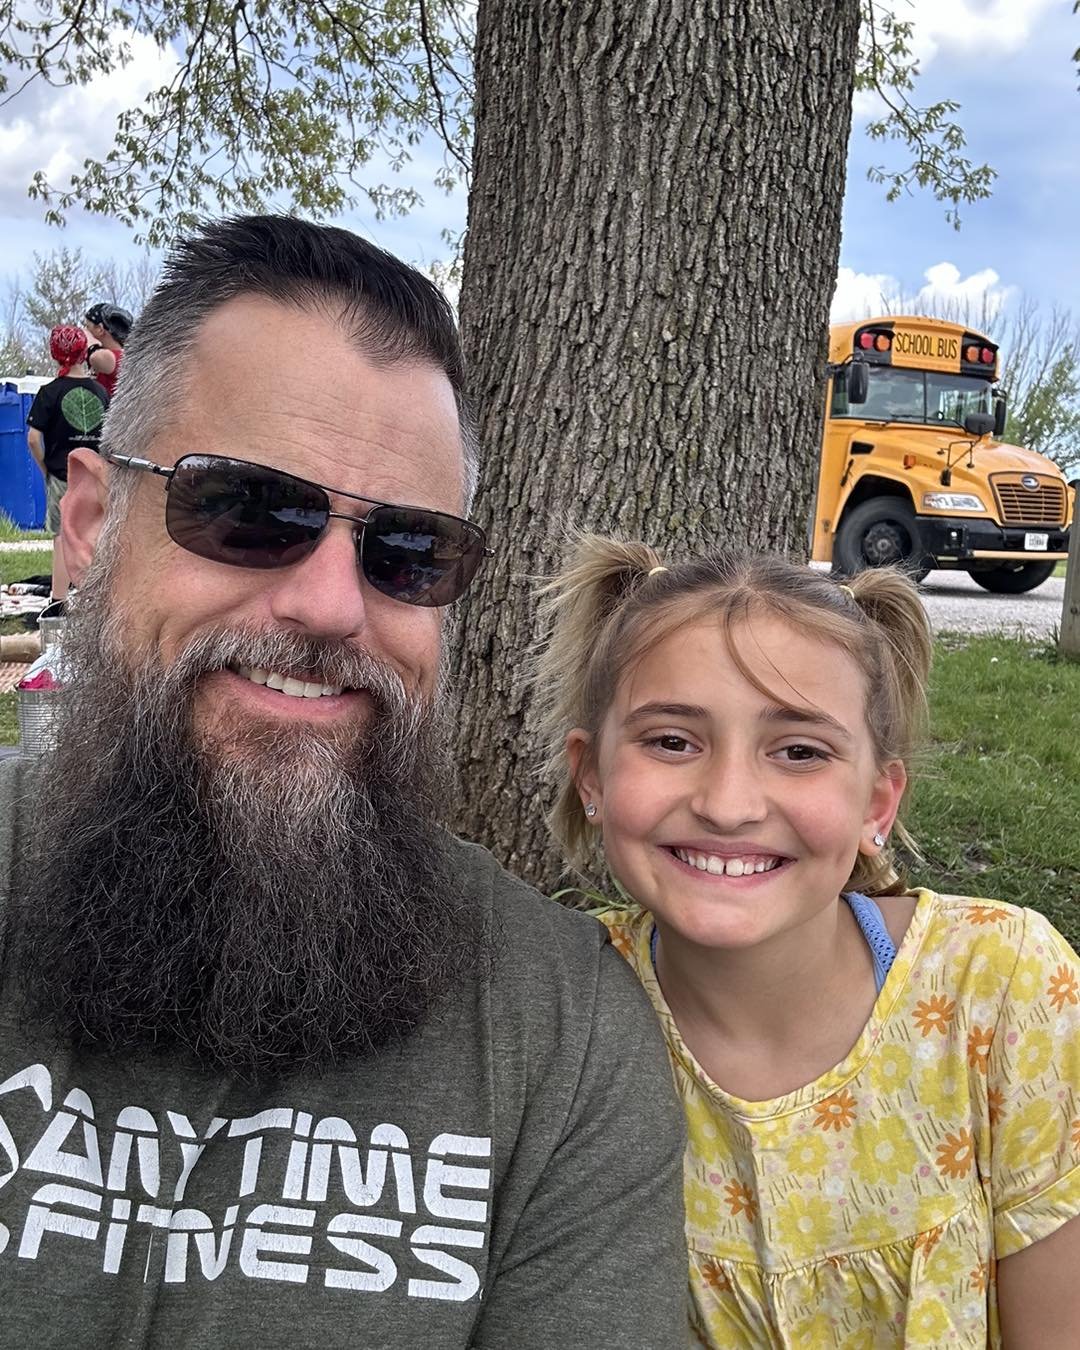 It was nice to slow down and spend the day last week with this one on her Pioneer Day field trip. I&rsquo;m thankful that our school prioritizes teaching Iowa&rsquo;s rich history in an interactive way that they will remember.